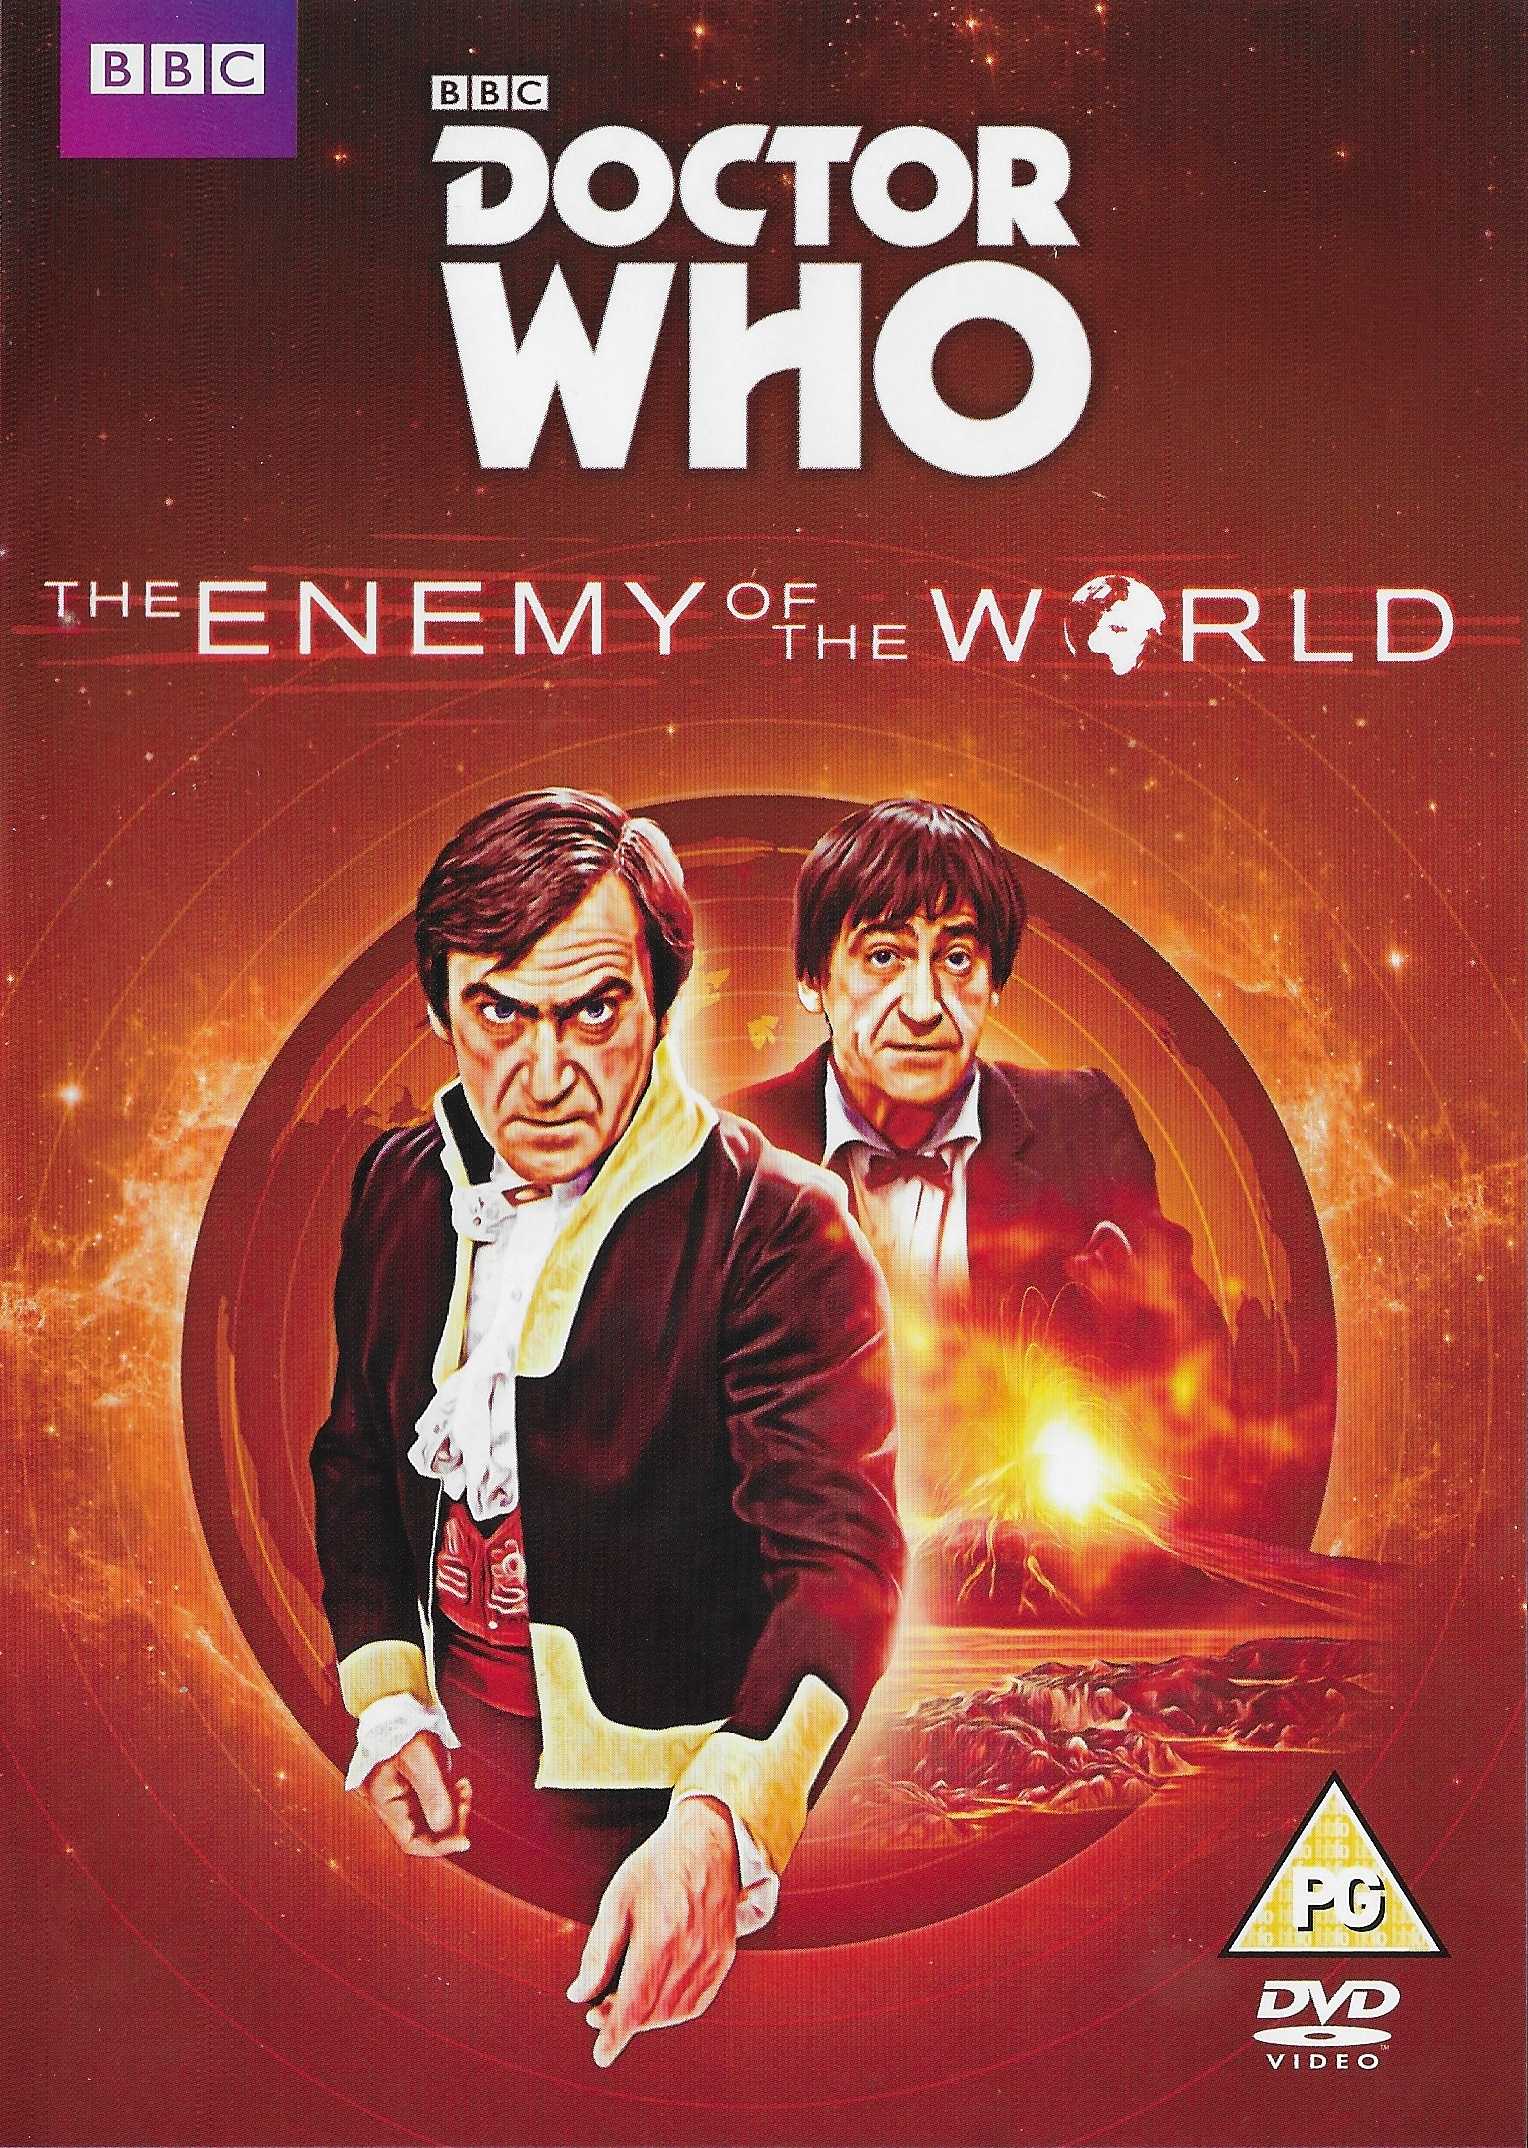 Picture of BBCDVD 3866 Doctor Who - The enemy of the world (Limited edition) by artist David Whitaker from the BBC dvds - Records and Tapes library